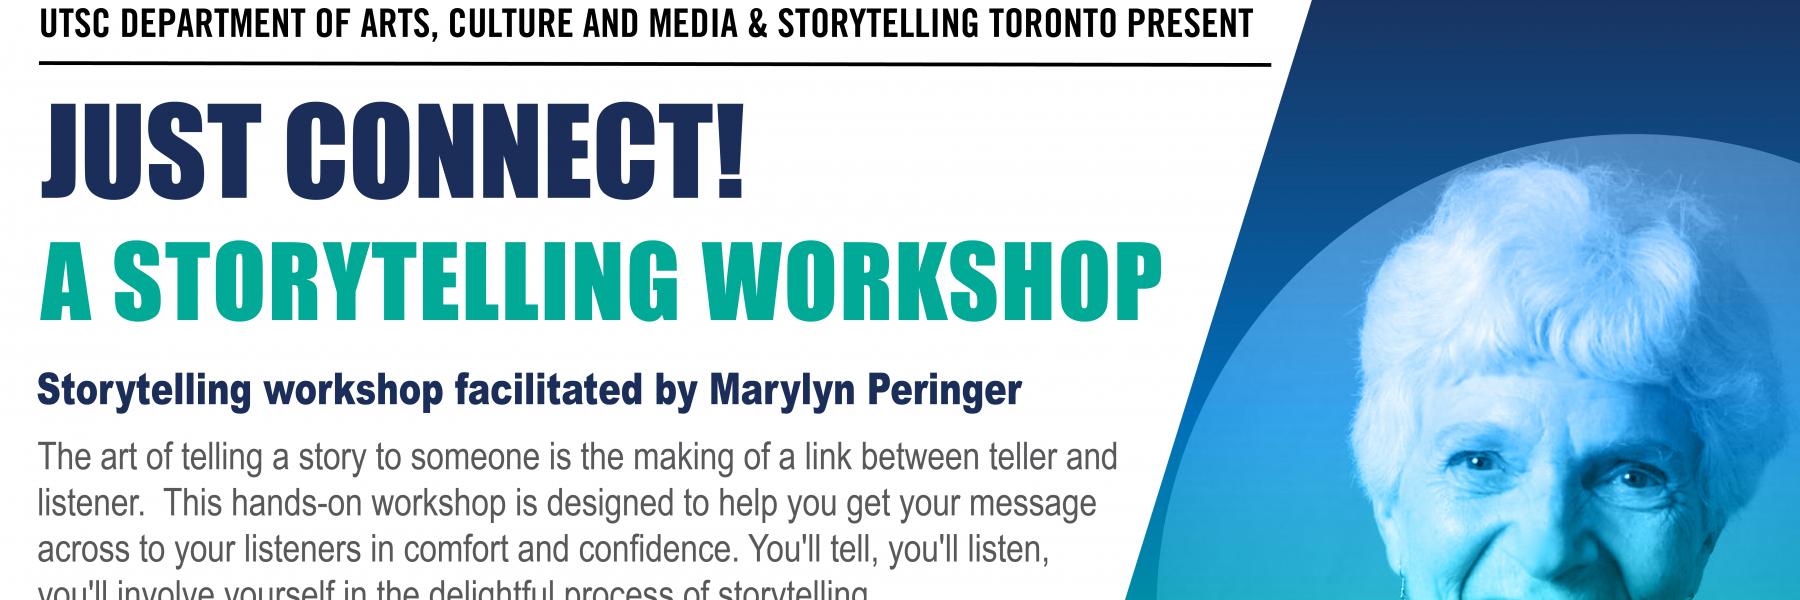 Just Connect! Storytelling workshop by Marylyn Peringer